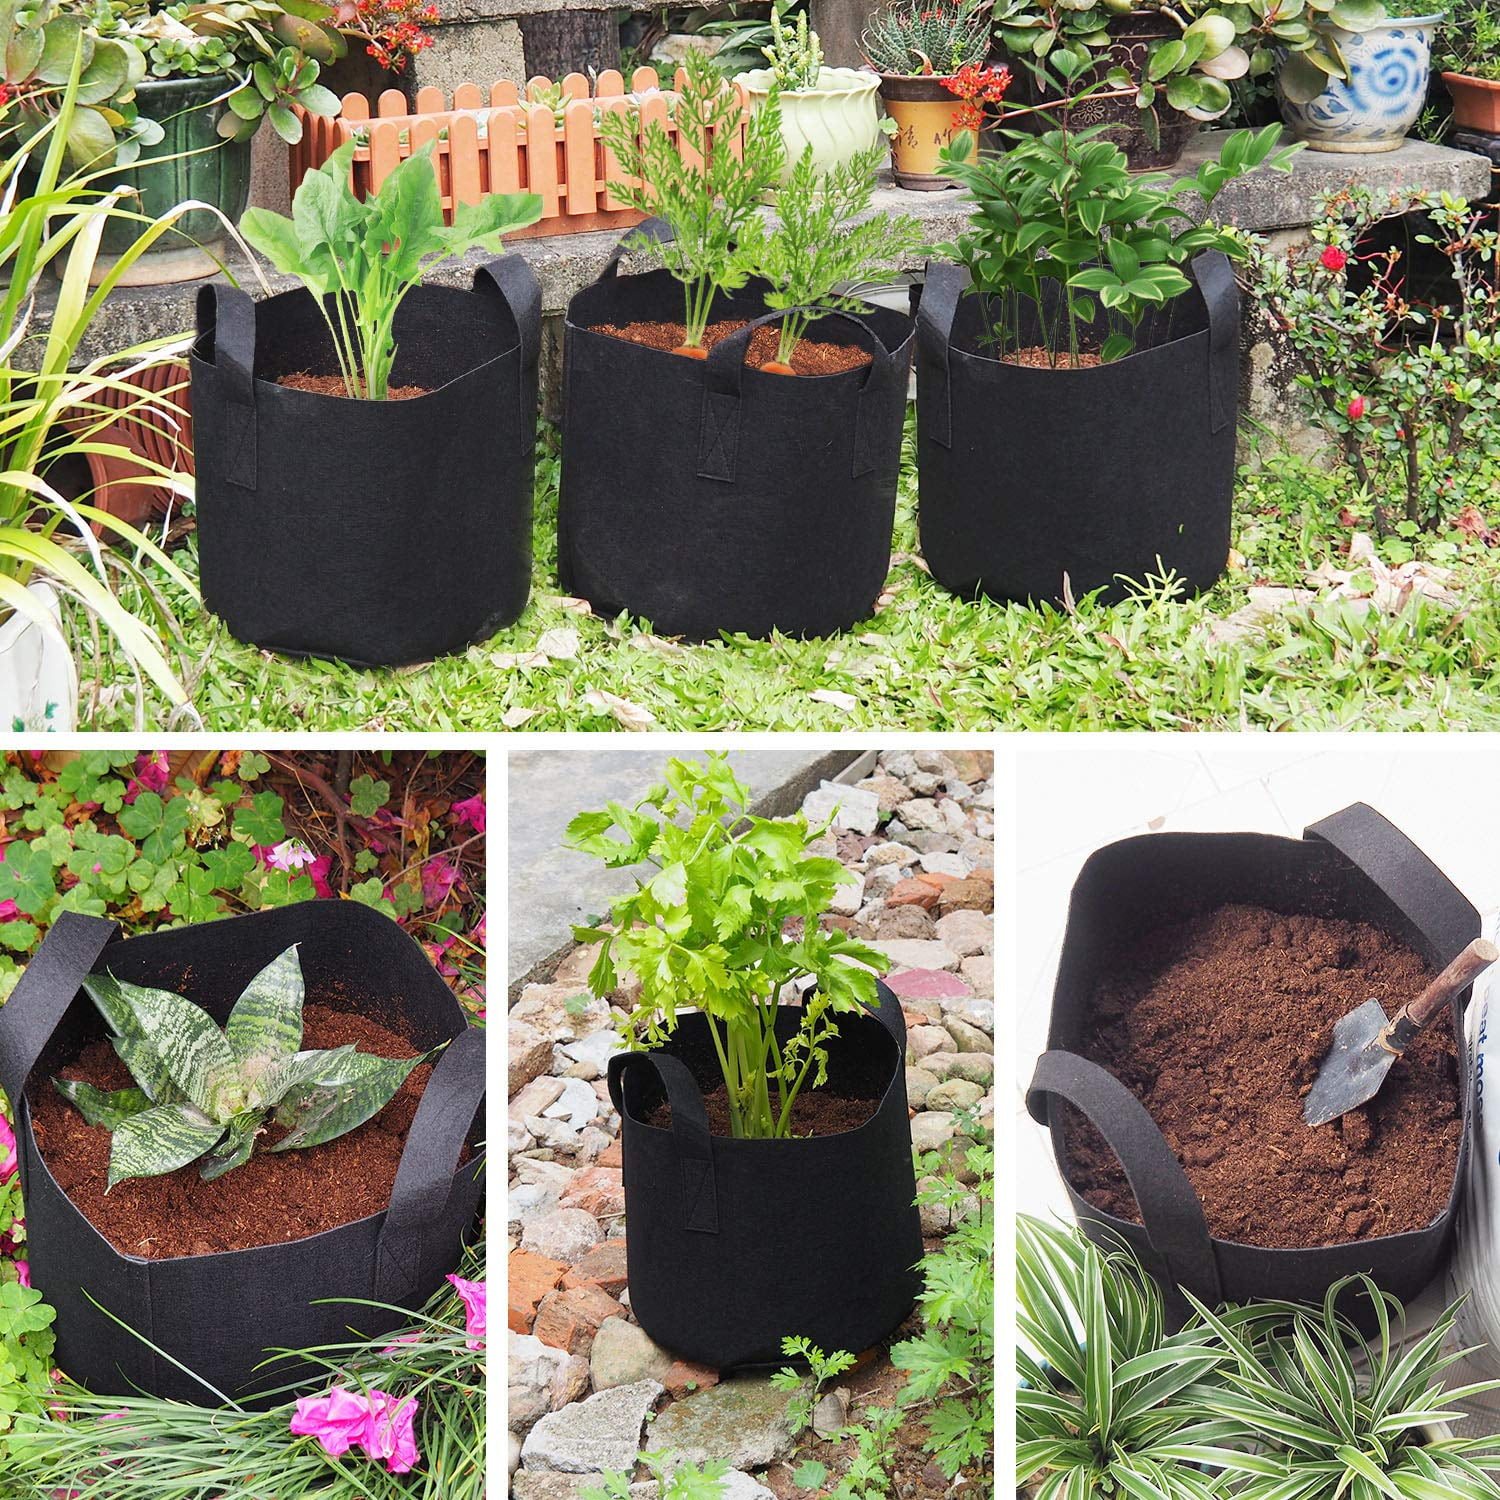 10 Packs Fabric Plant Pot Pouch Root Aeration Container Grow Bag 5,7,10,20Gallon 